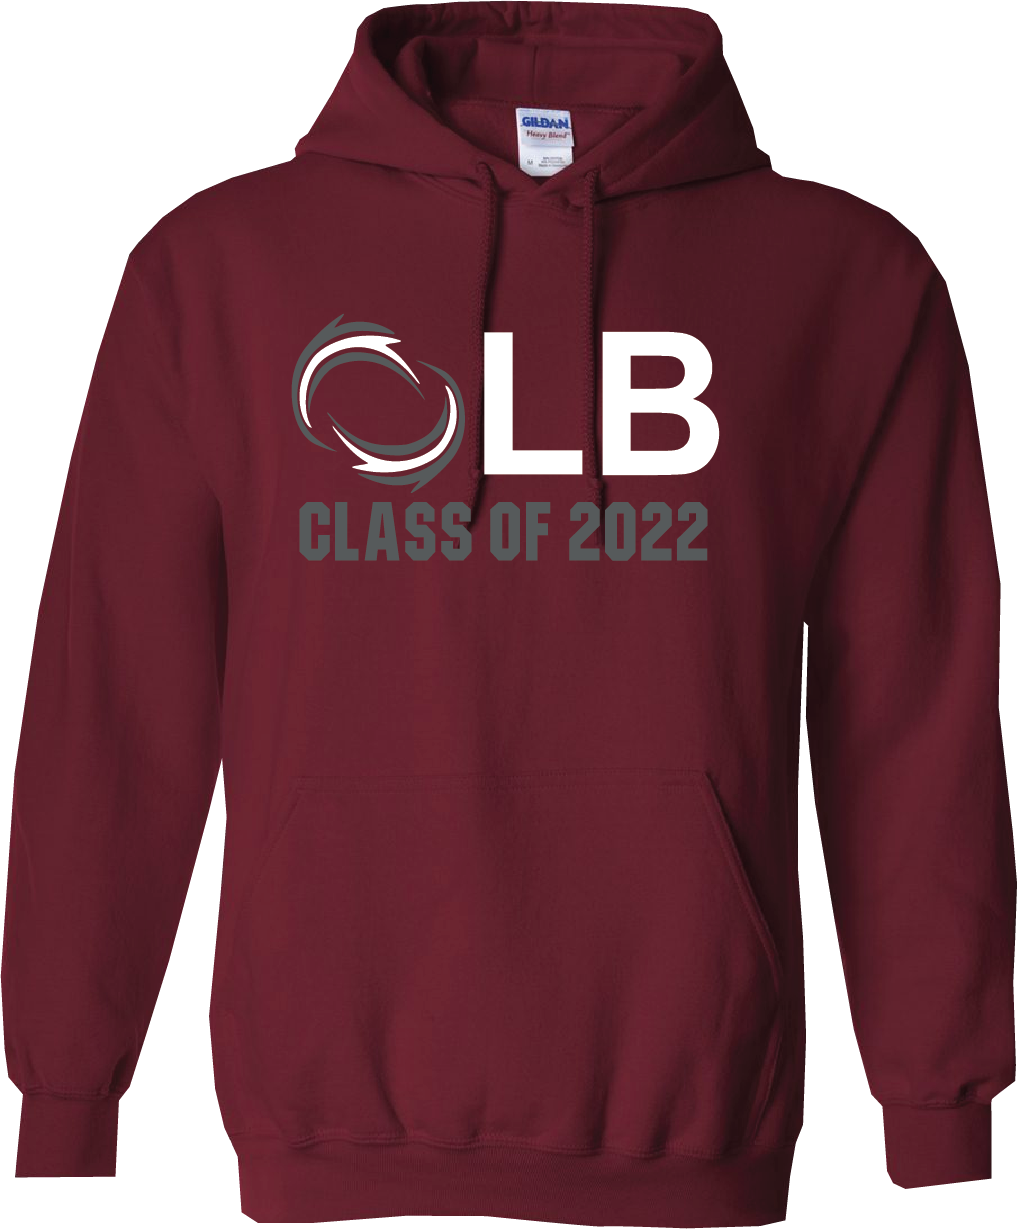 Class of 2022 Hoody- Personalized